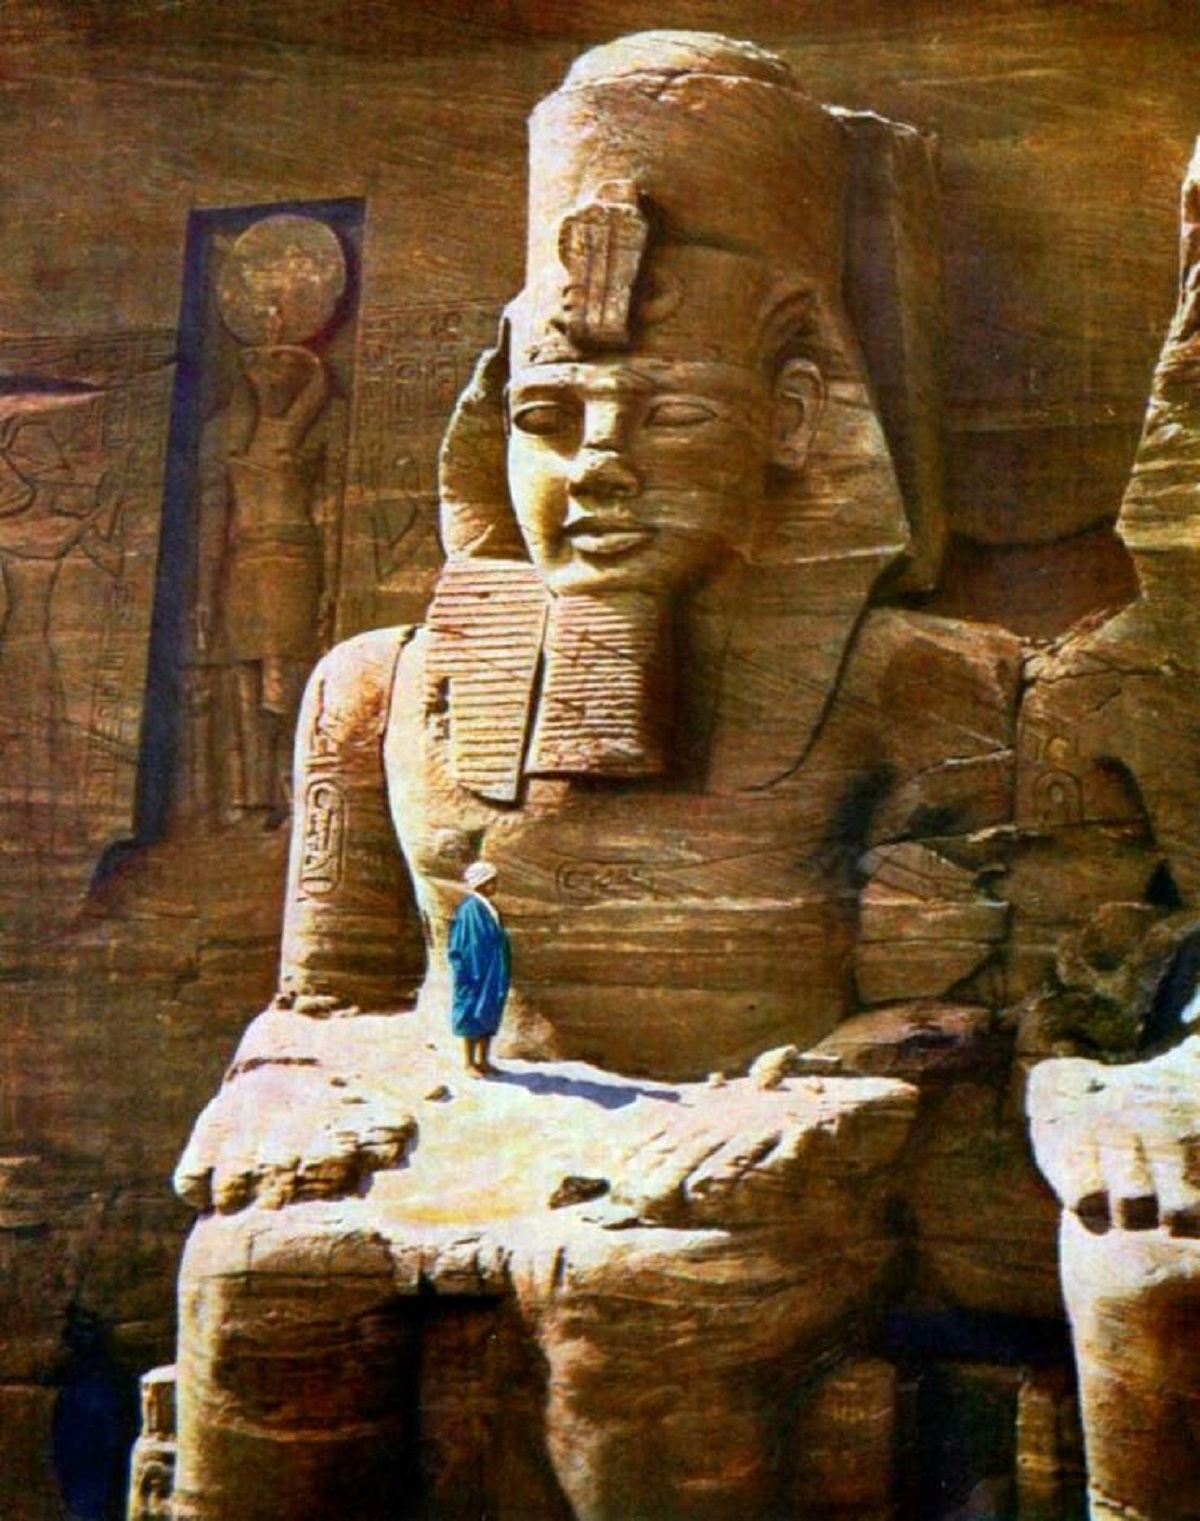 This colorized picture of Ramses II's Great Temple at Abu Simbel in Egypt, taken circa 1865, shows just how enormous the colossal statues in front of the entrance are: